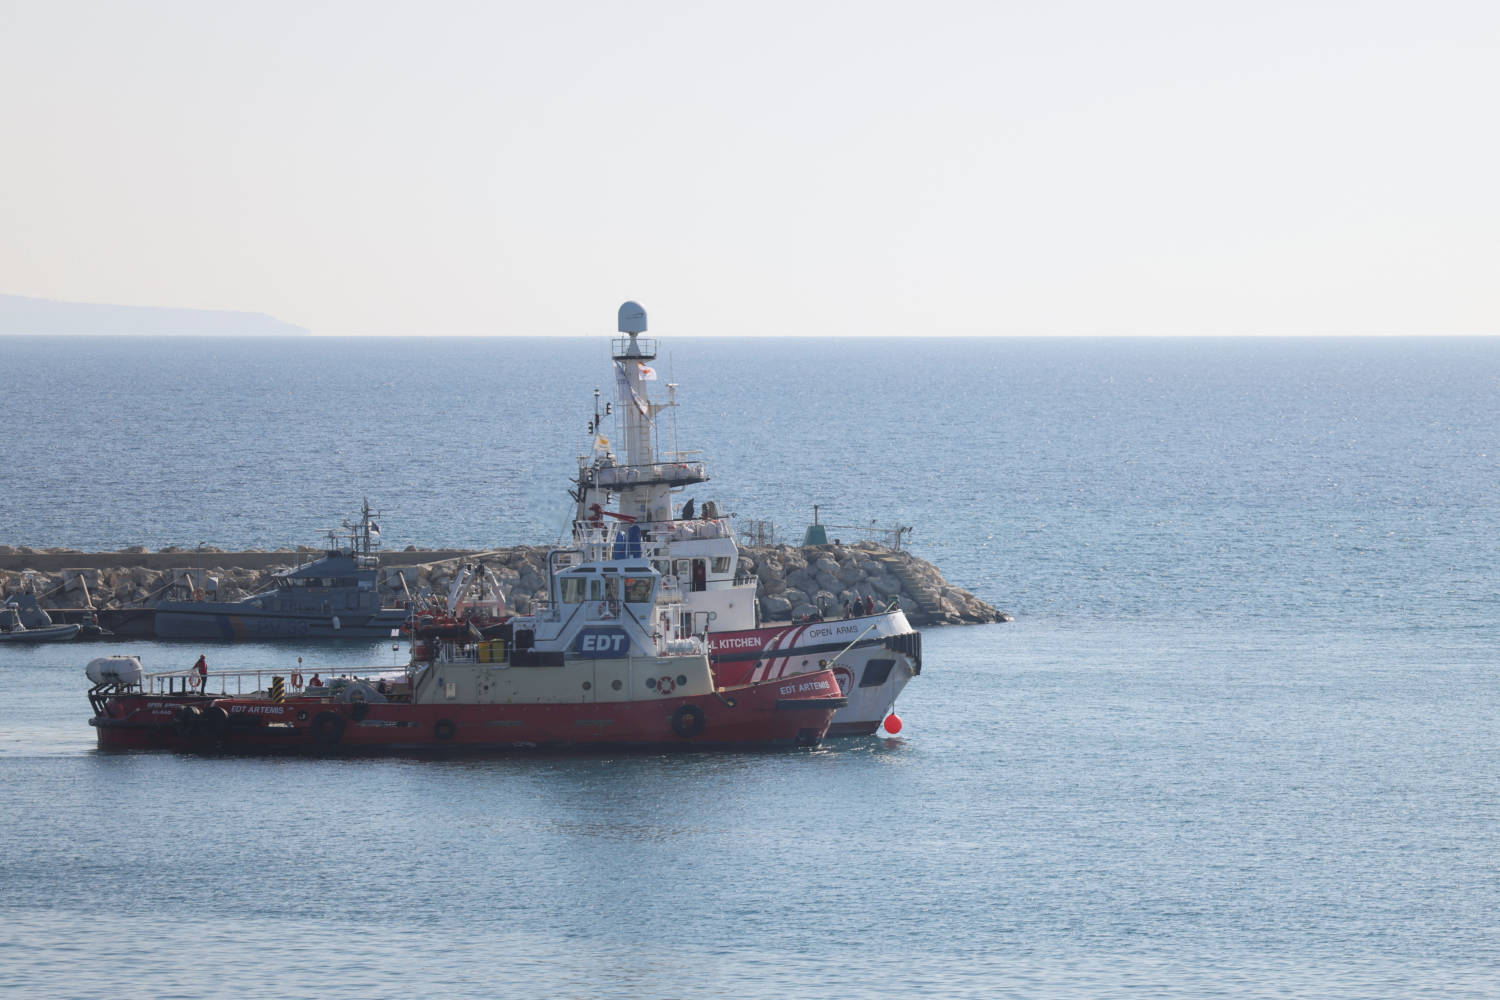 Rescue Vessel Open Arms Departs From The Port Of Larnaca With Humanitarian Aid For Gaza